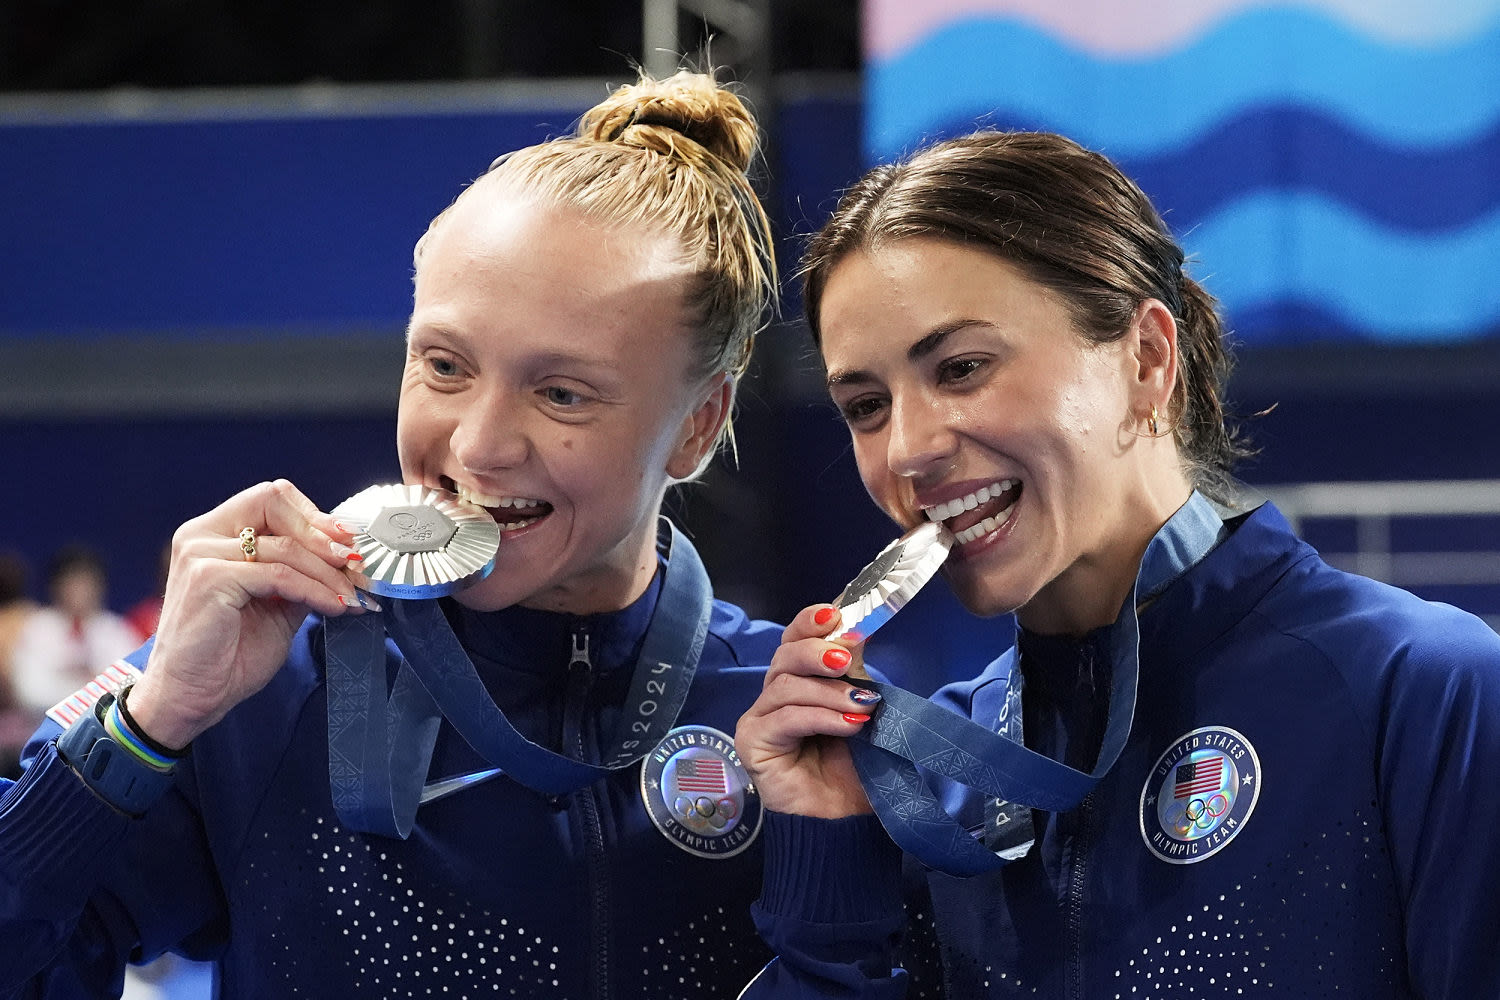 Synchronized divers Sarah Bacon and Kassidy Cook bring home 1st U.S. medals